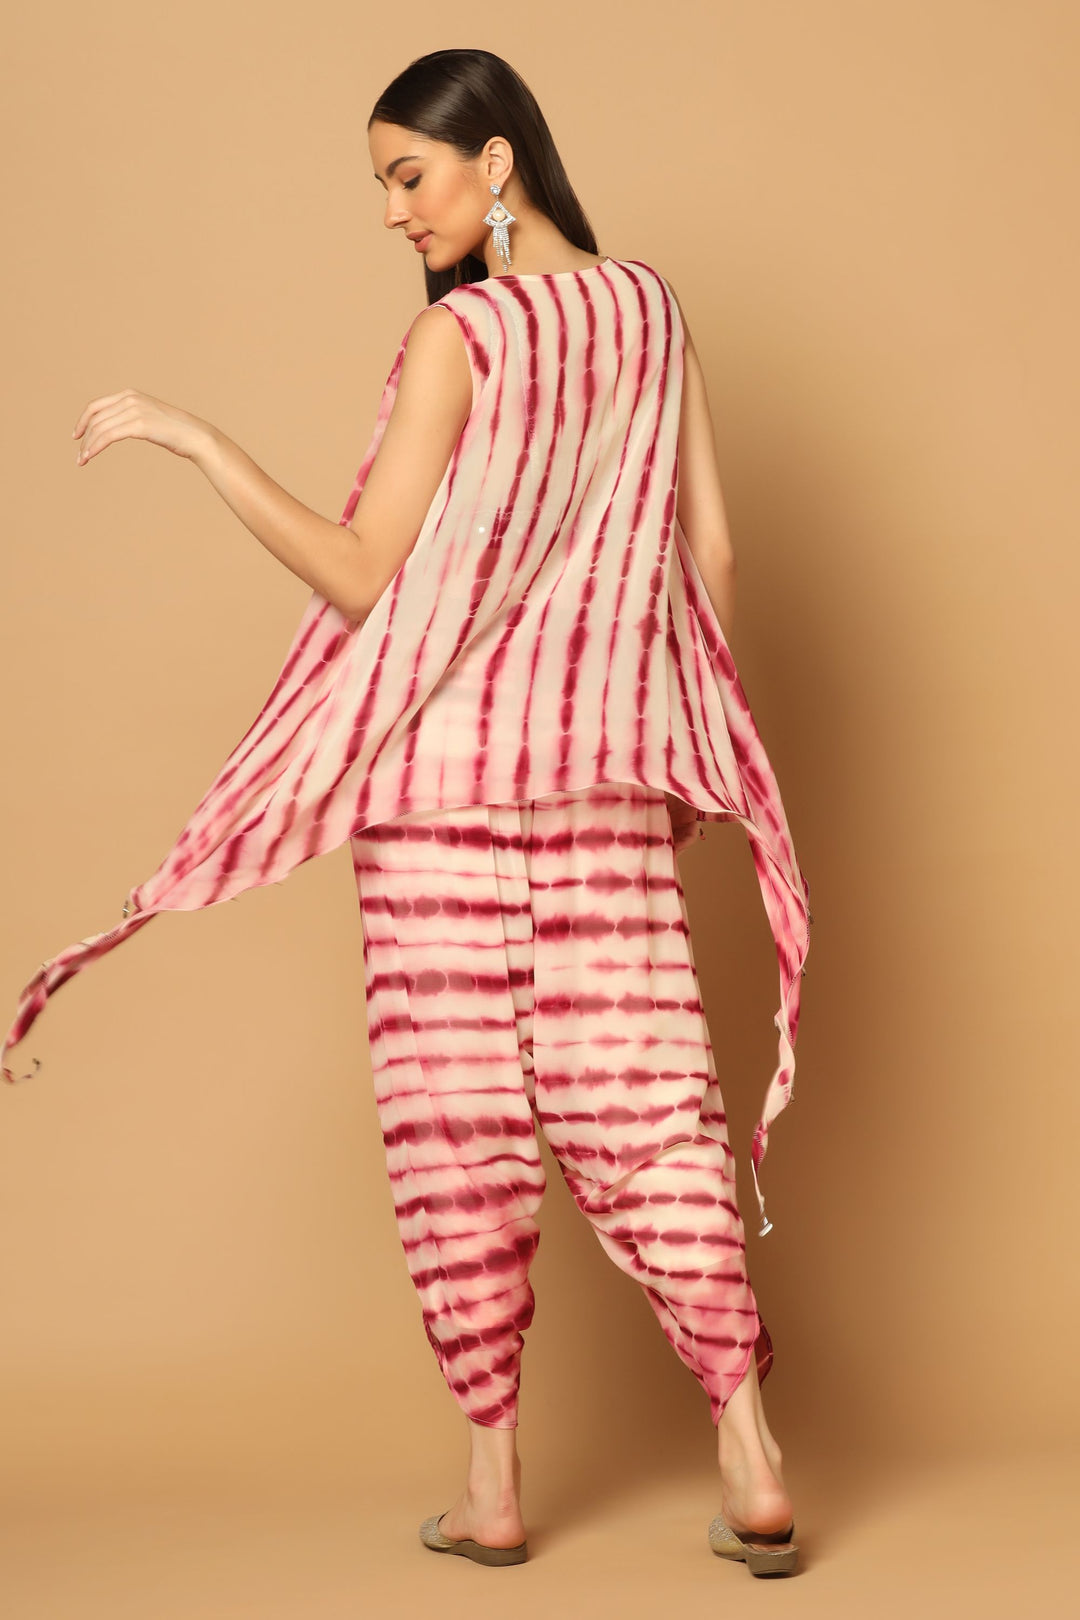 Maroon Tie & Dye Dhoti Set with A Cape